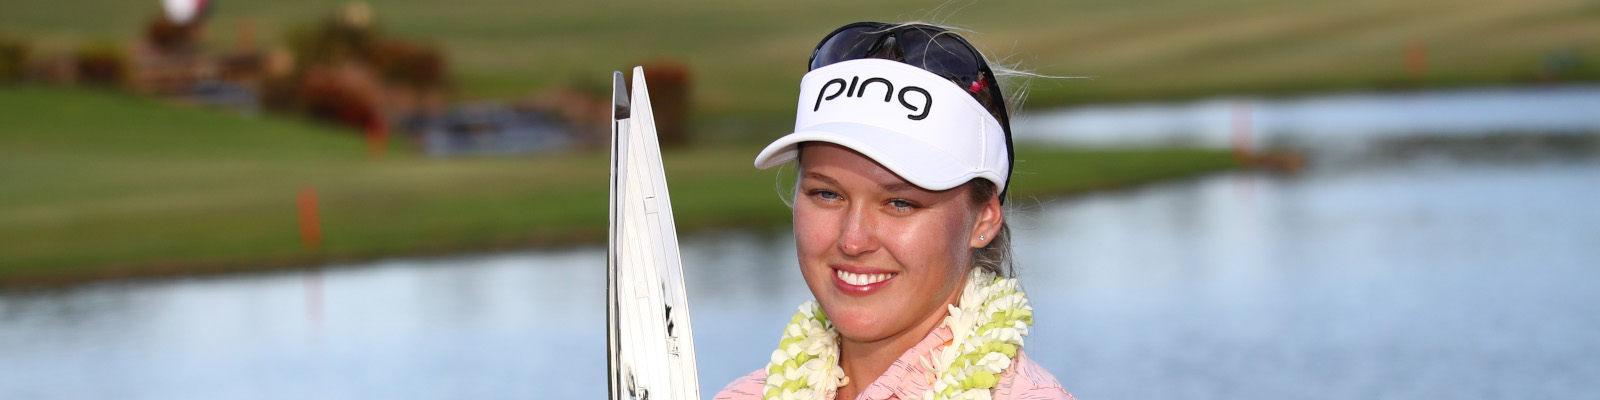 Brooke Henderson (Photo by Gregory Shamus/Getty Images)